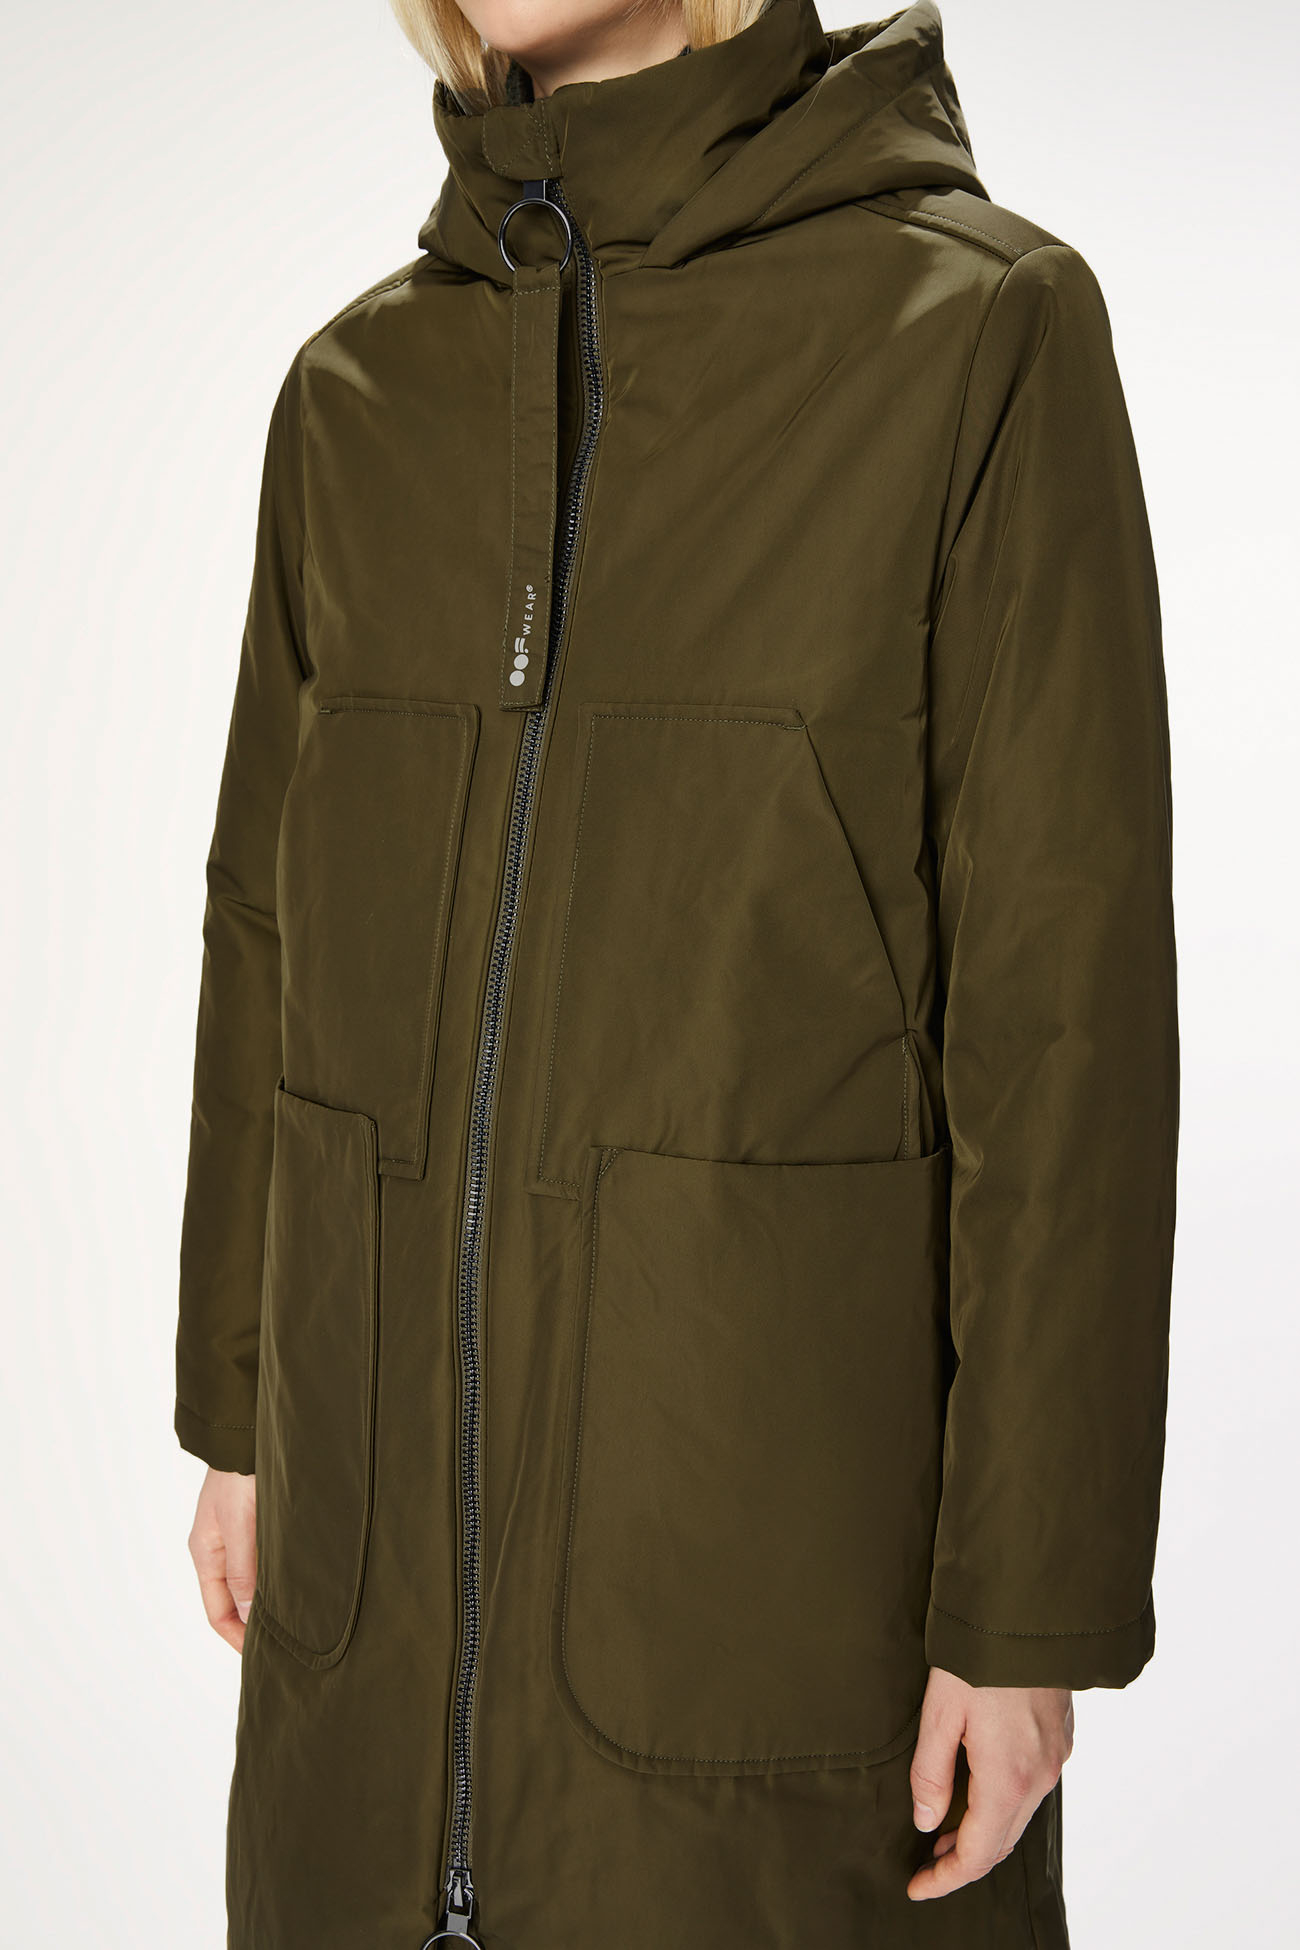 JACKET 9094 MADE IN NYLON MEMORY - ARMY GREEN - OOF WEAR